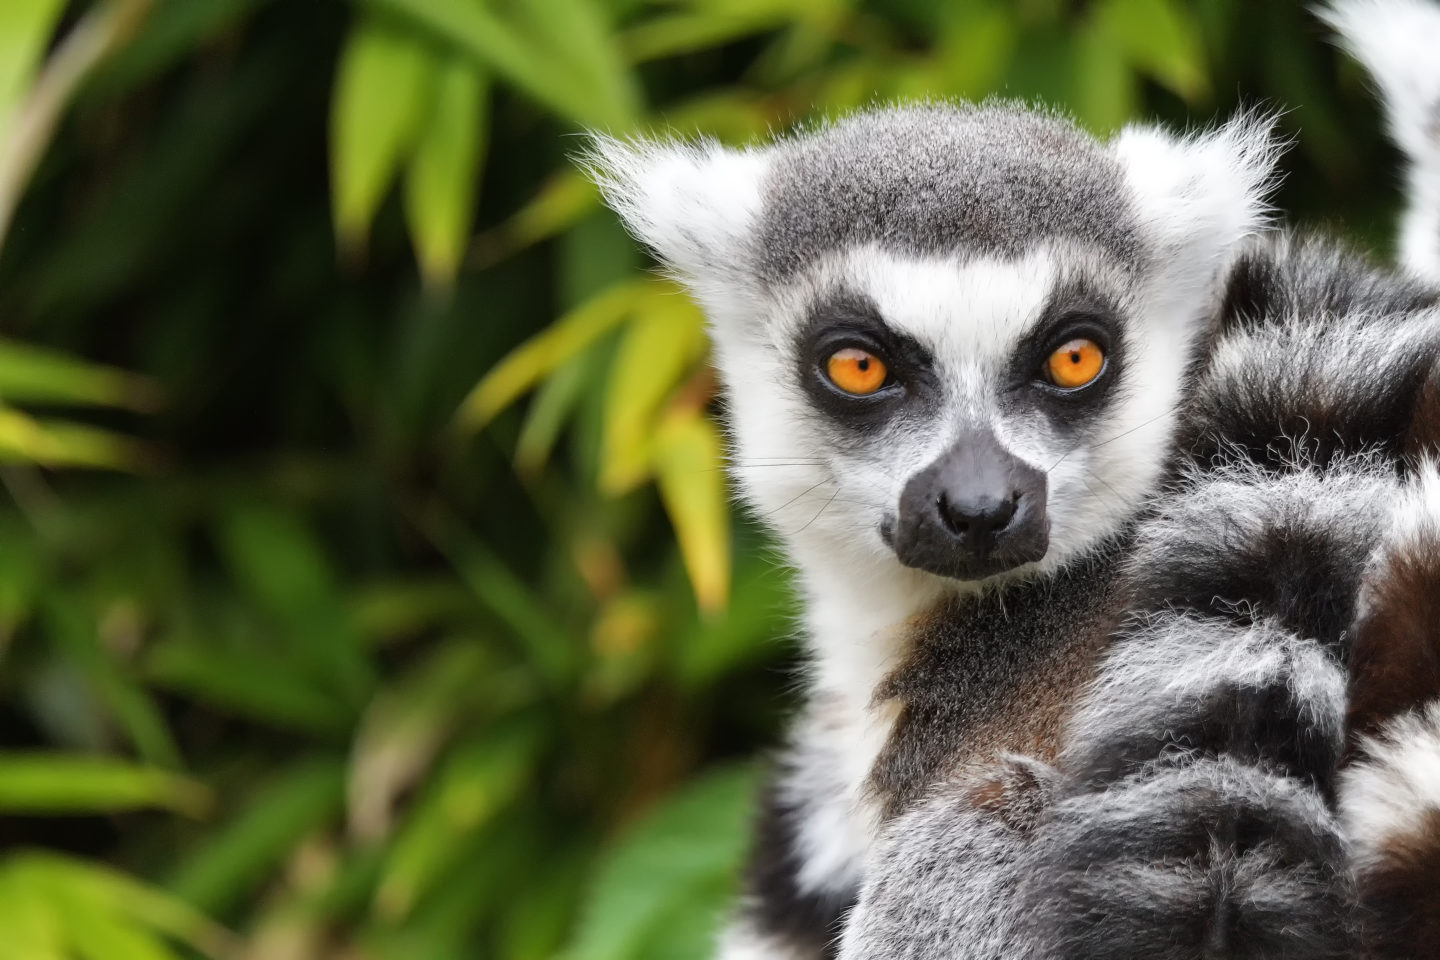 Hike through the rainforest of Madagascar in search of lemurs